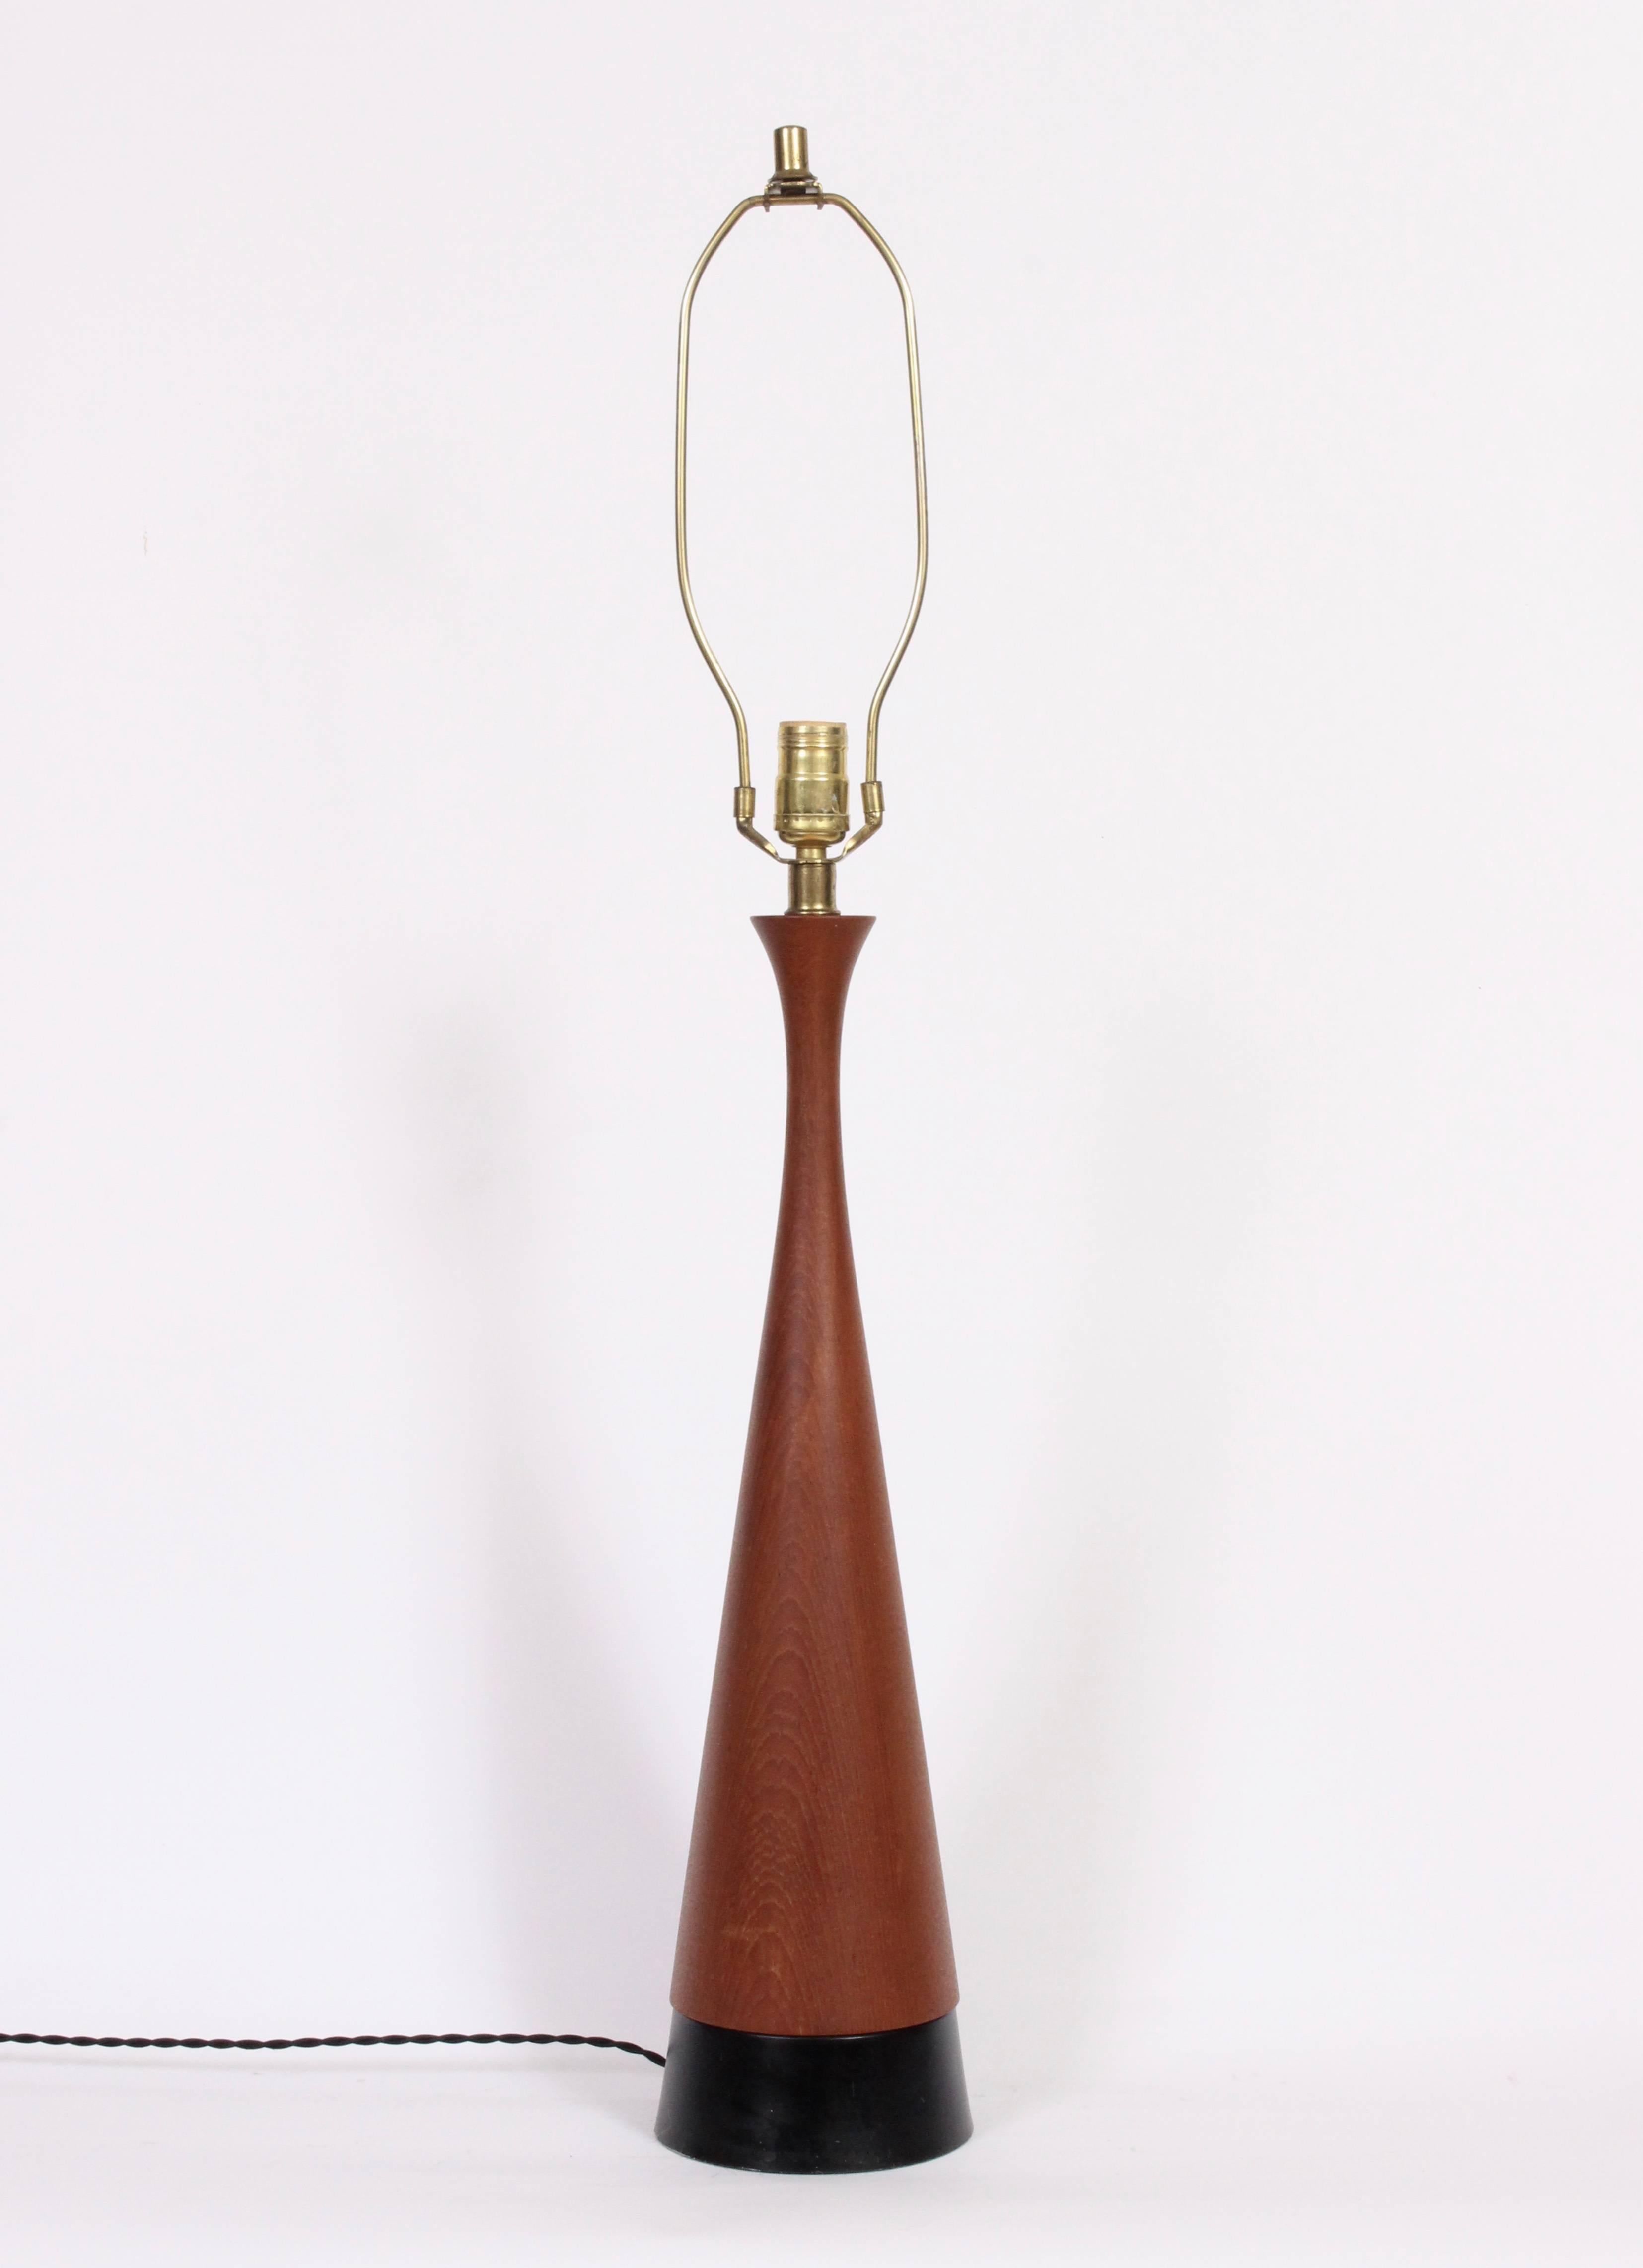 Substantial Danish Modern 3'H Diabolo Turned Teak Table Lamp with Black enameled base.  Featuring a beautifully grained smooth form with small footprint for height. 25.5 H to top of socket. Shade shown for display only and not for sale (10 H x 13 D